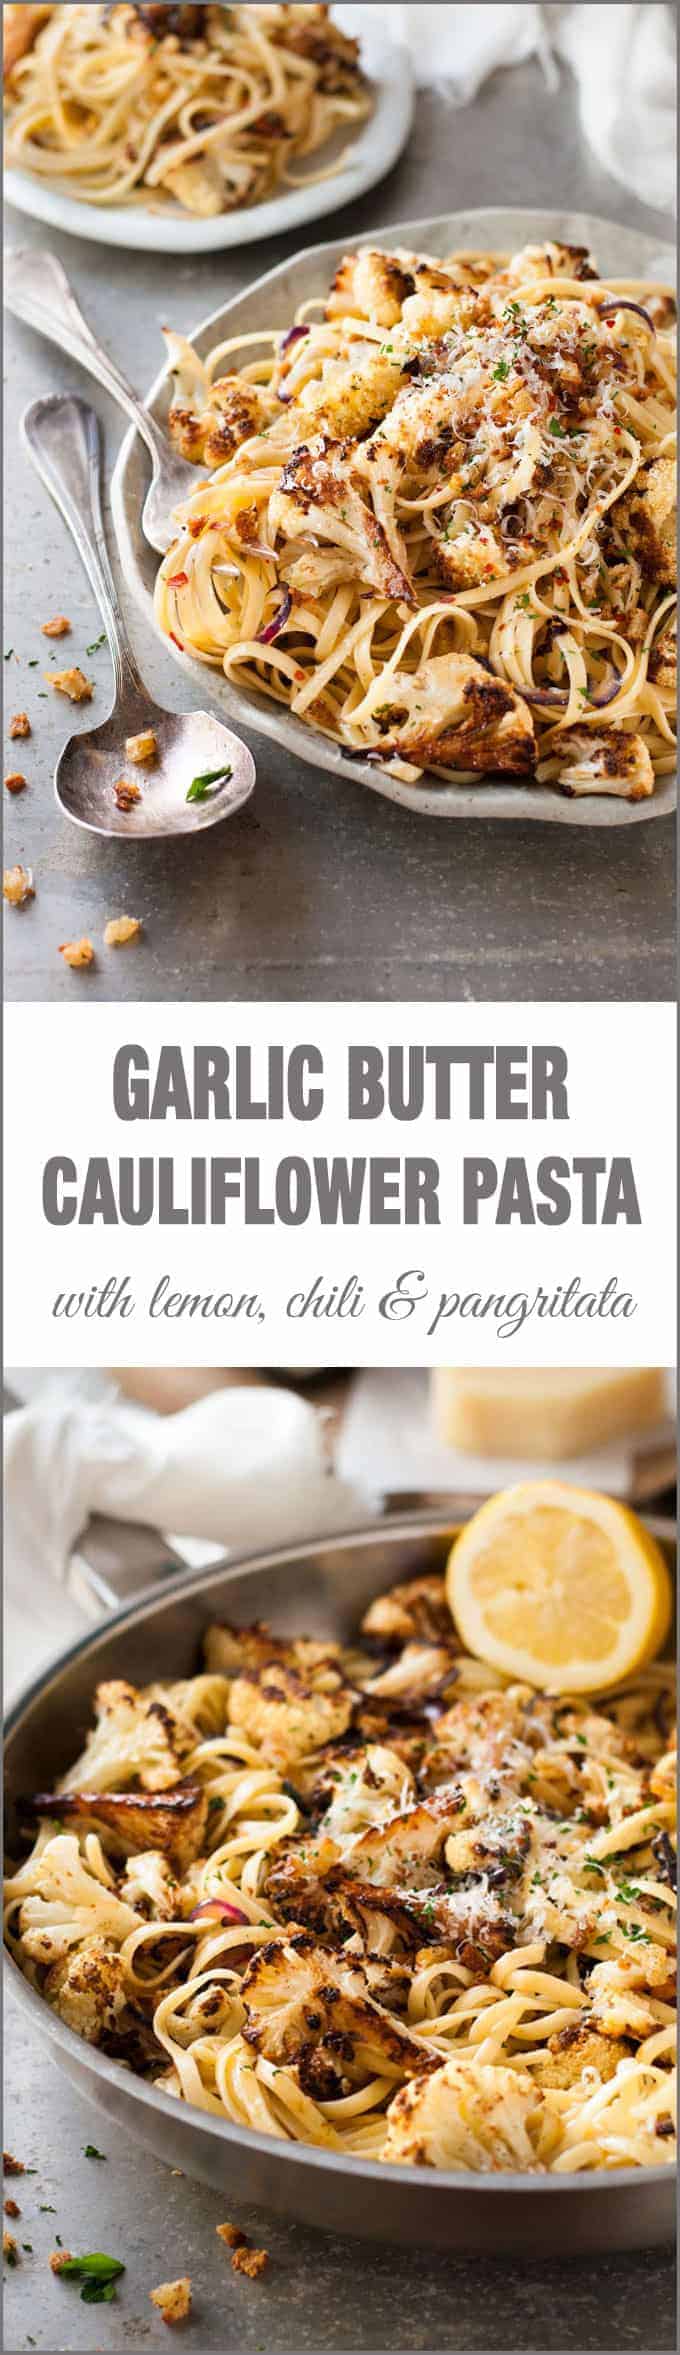 Garlic Butter Cauliflower Pasta with Pangritata - simple midweek magic made with 2 slices of bread, cauliflower, pasta and a few pantry essentials.